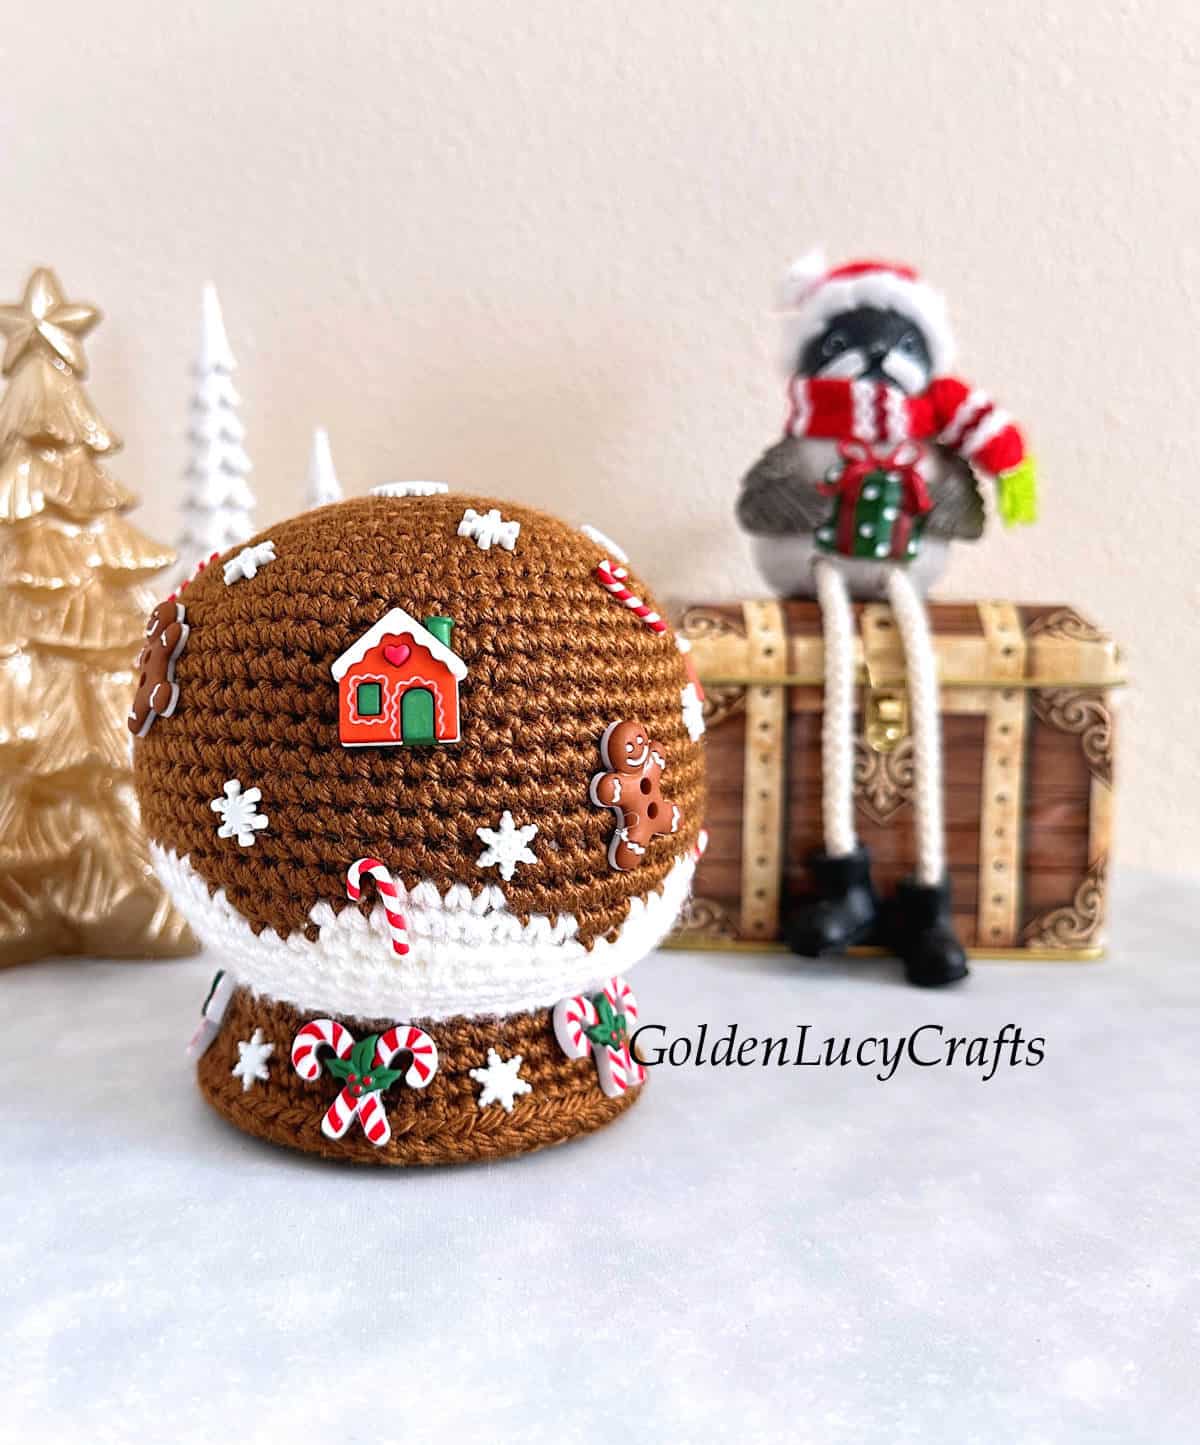 Crochet Christmas snow globe amigurumi made in brown and white colors.